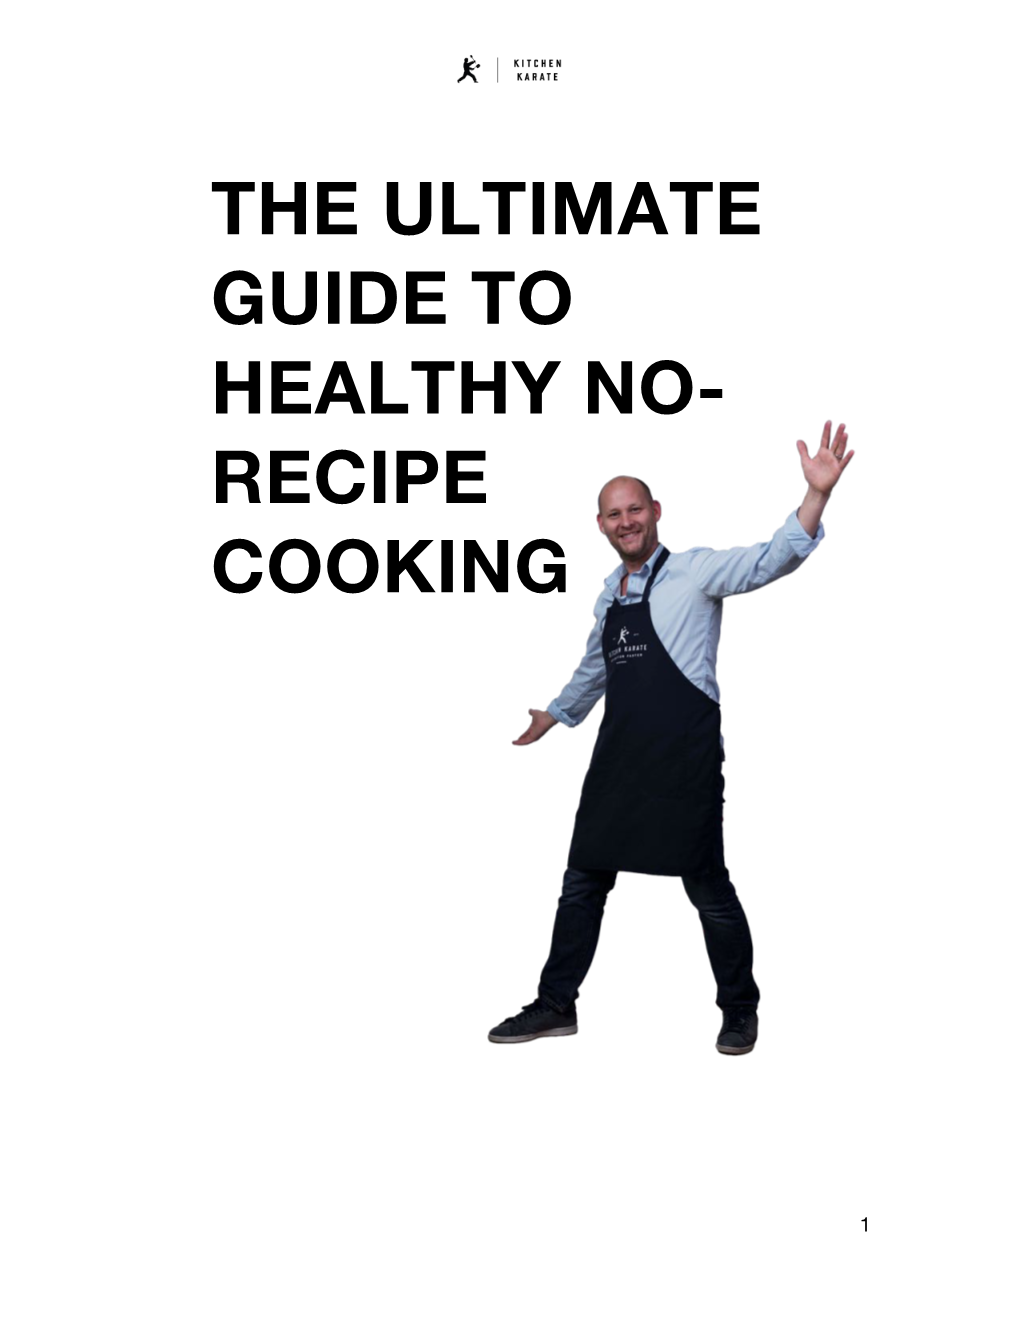 The Ultimate Guide to Healthy No- Recipe Cooking